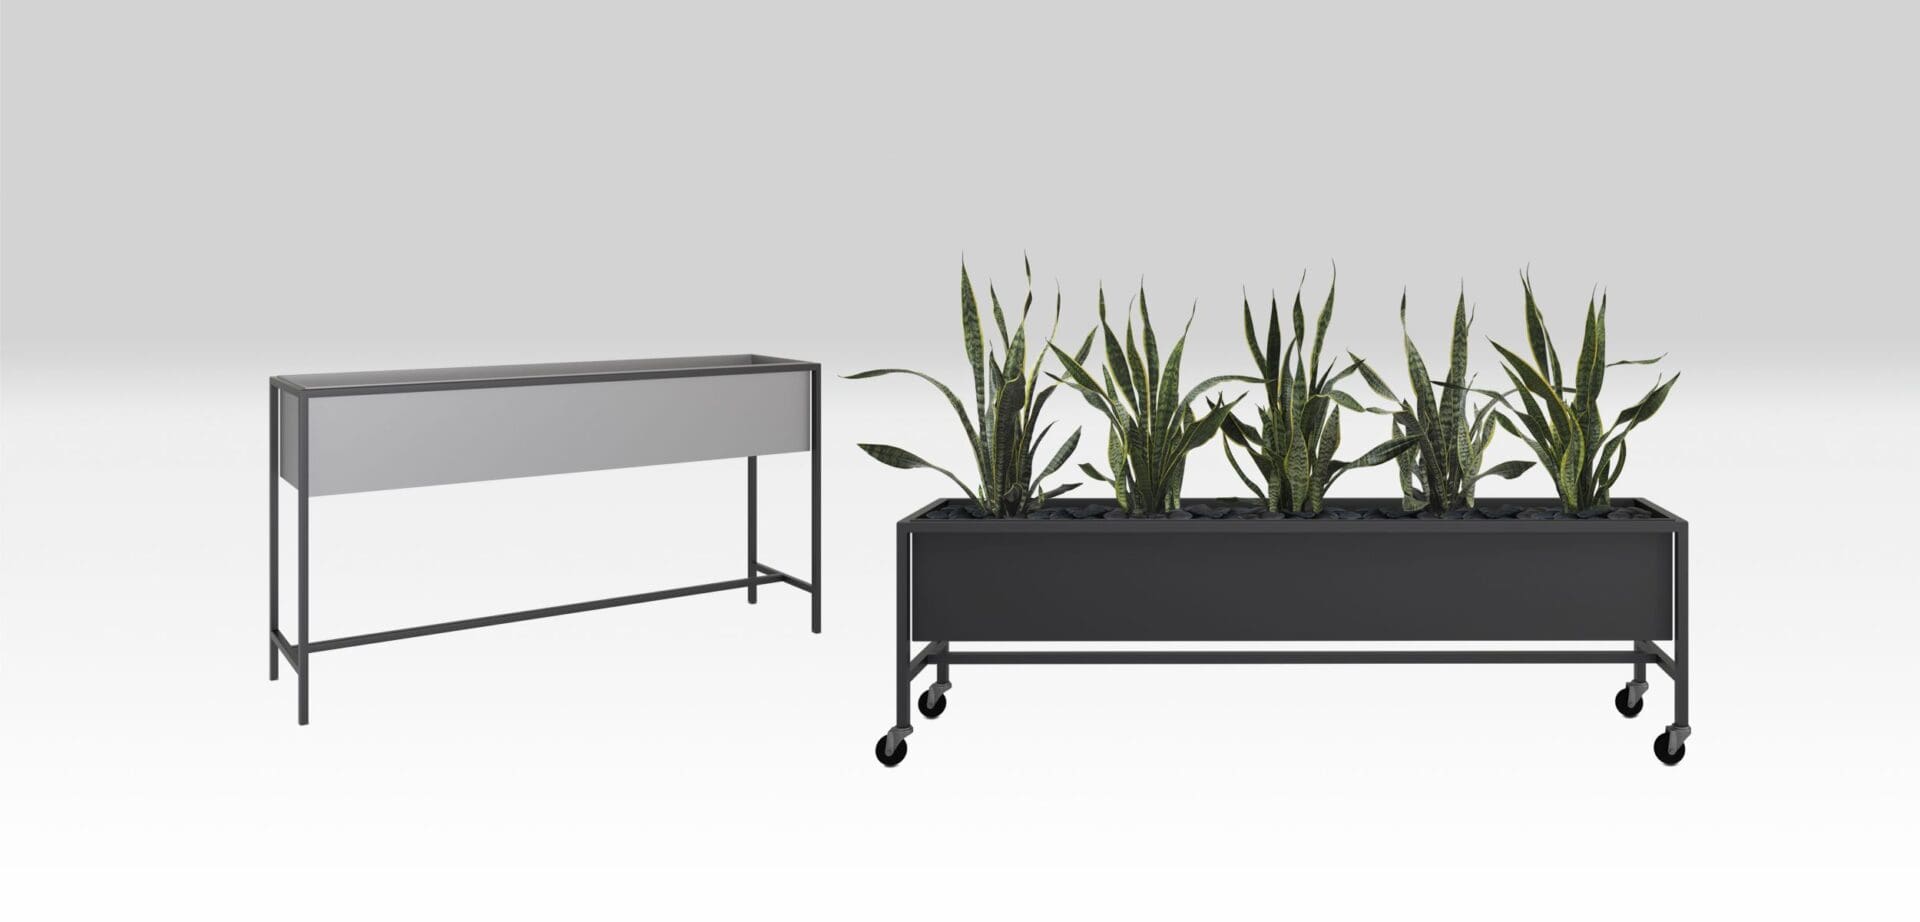 A table and planter set with plants in it.